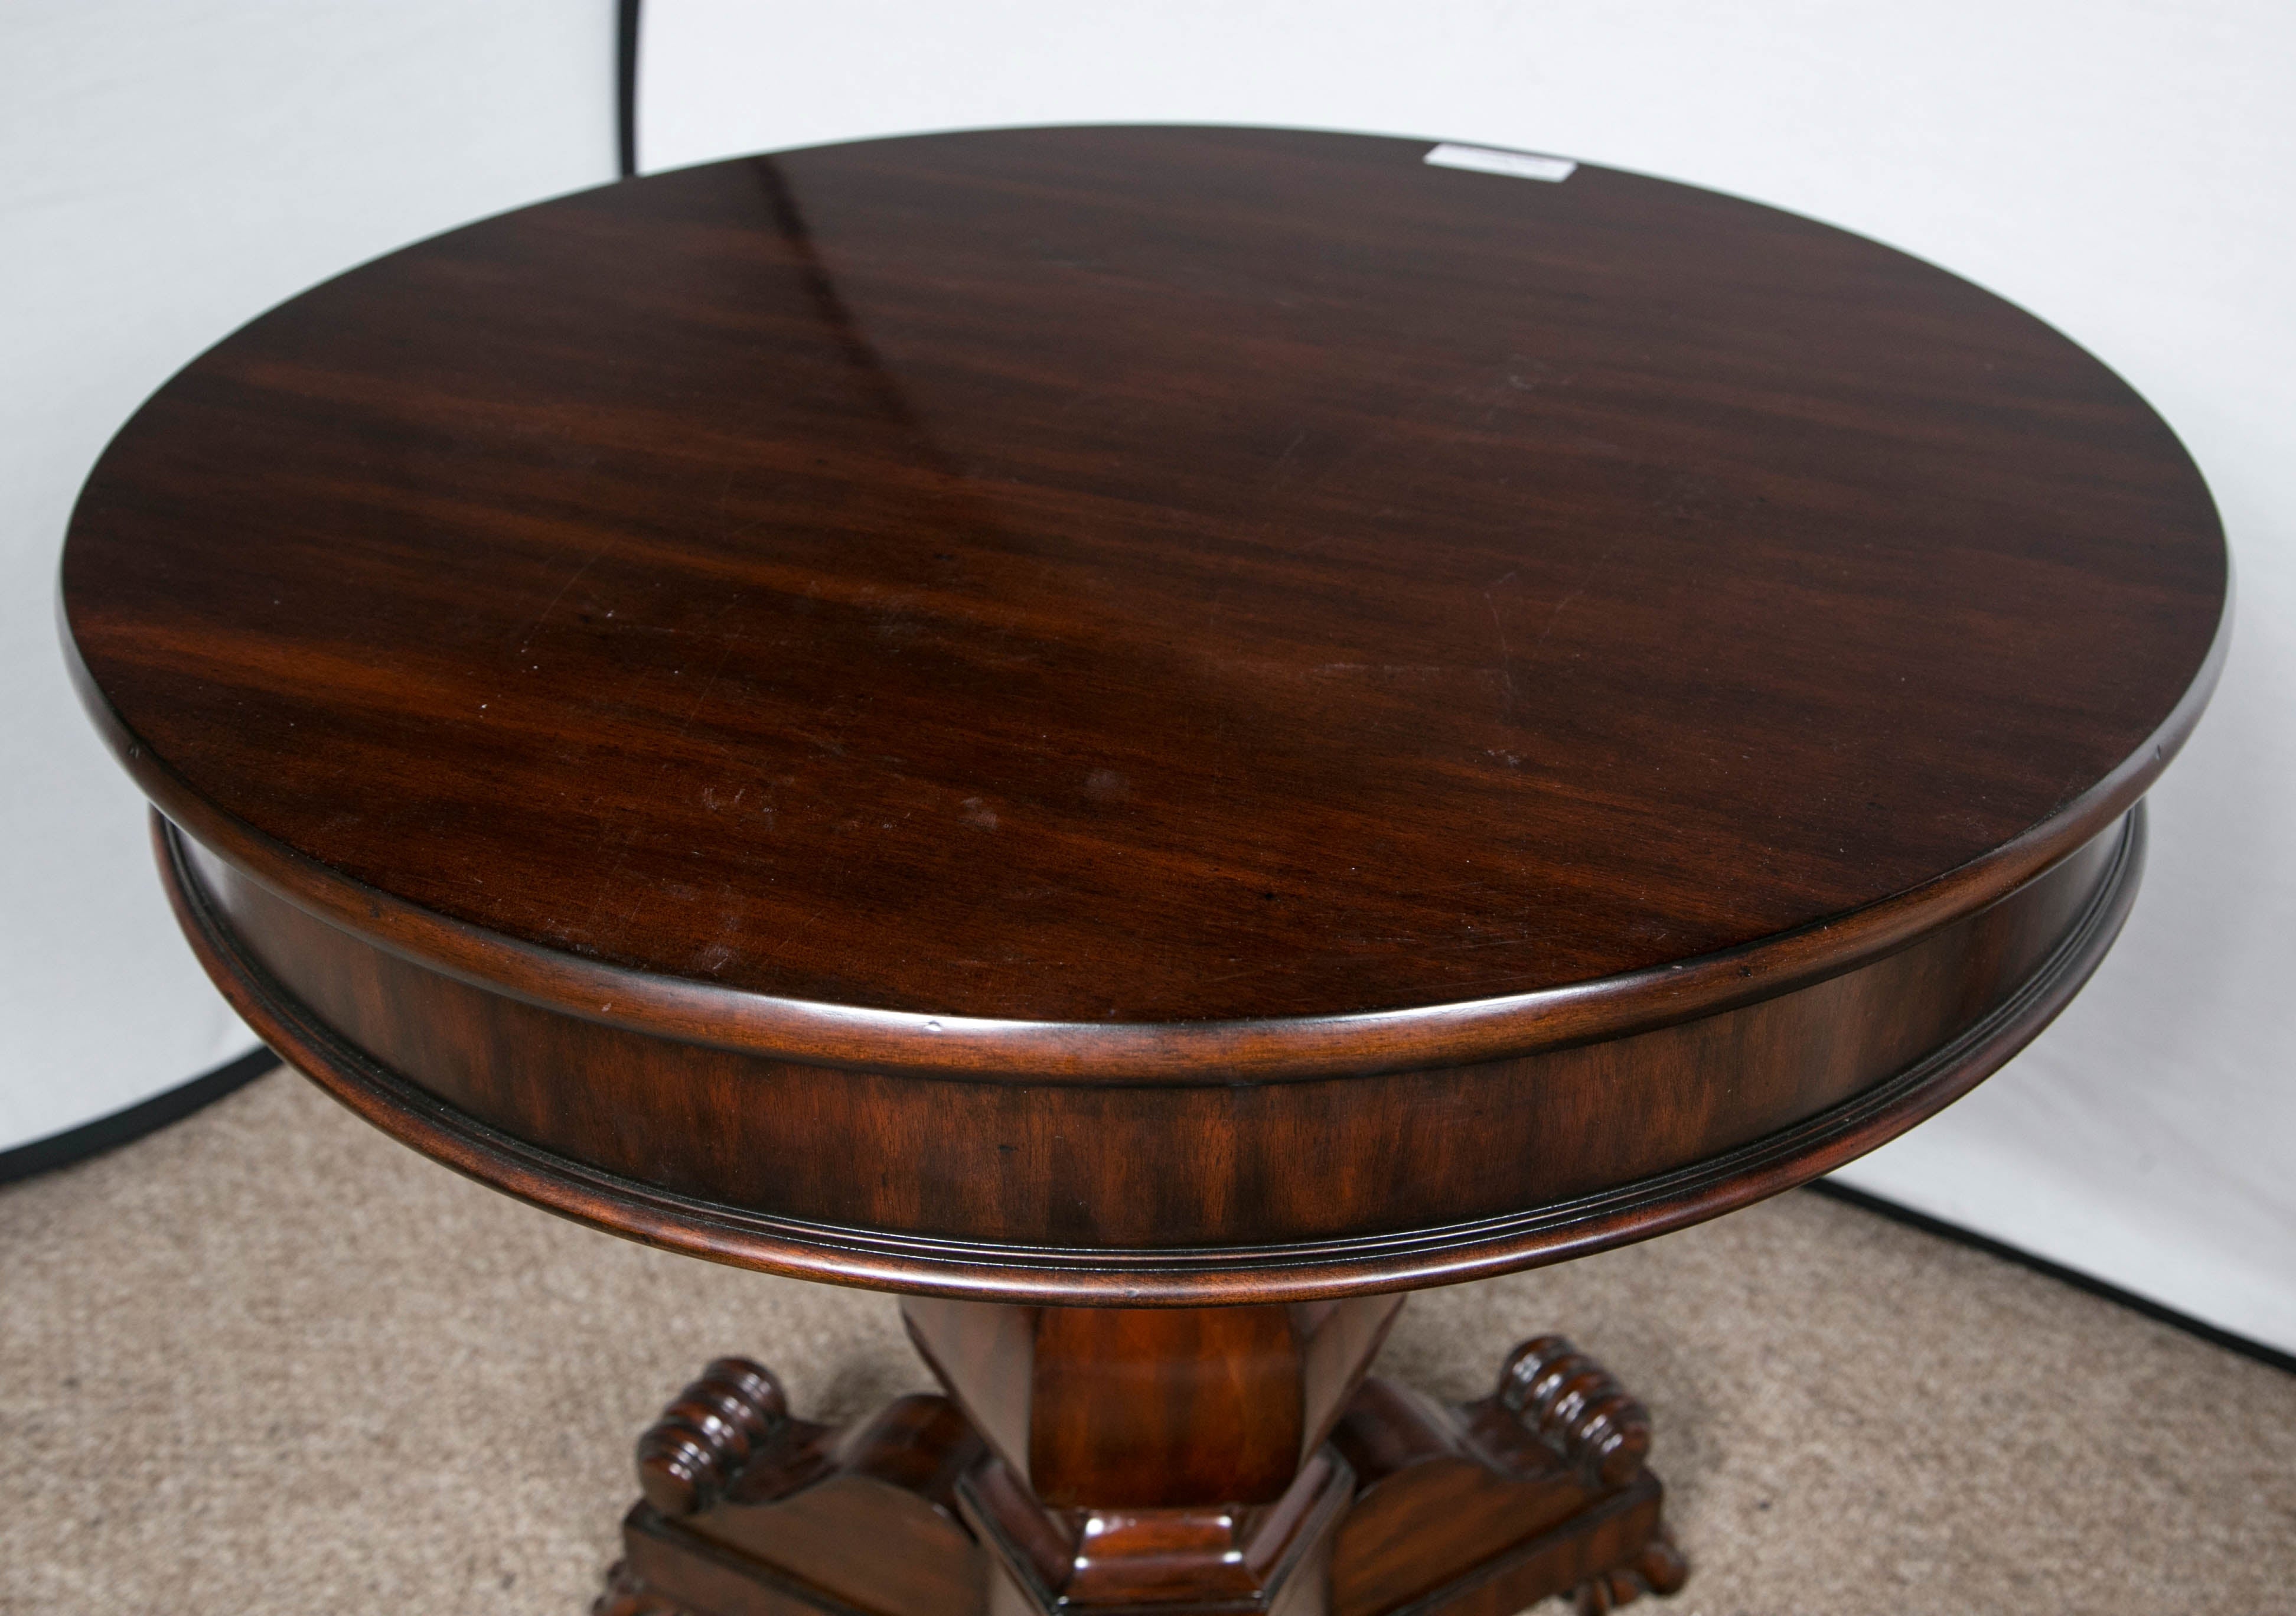 Ralph Lauren New Bohemian pedestal bedside table. An urn shaped pedestal base on this round Empire mahogany end table.

Retail; $3,465.

Recently acquired from a container purchased directly from the showroom. Ralph Lauren Home Furnishings are